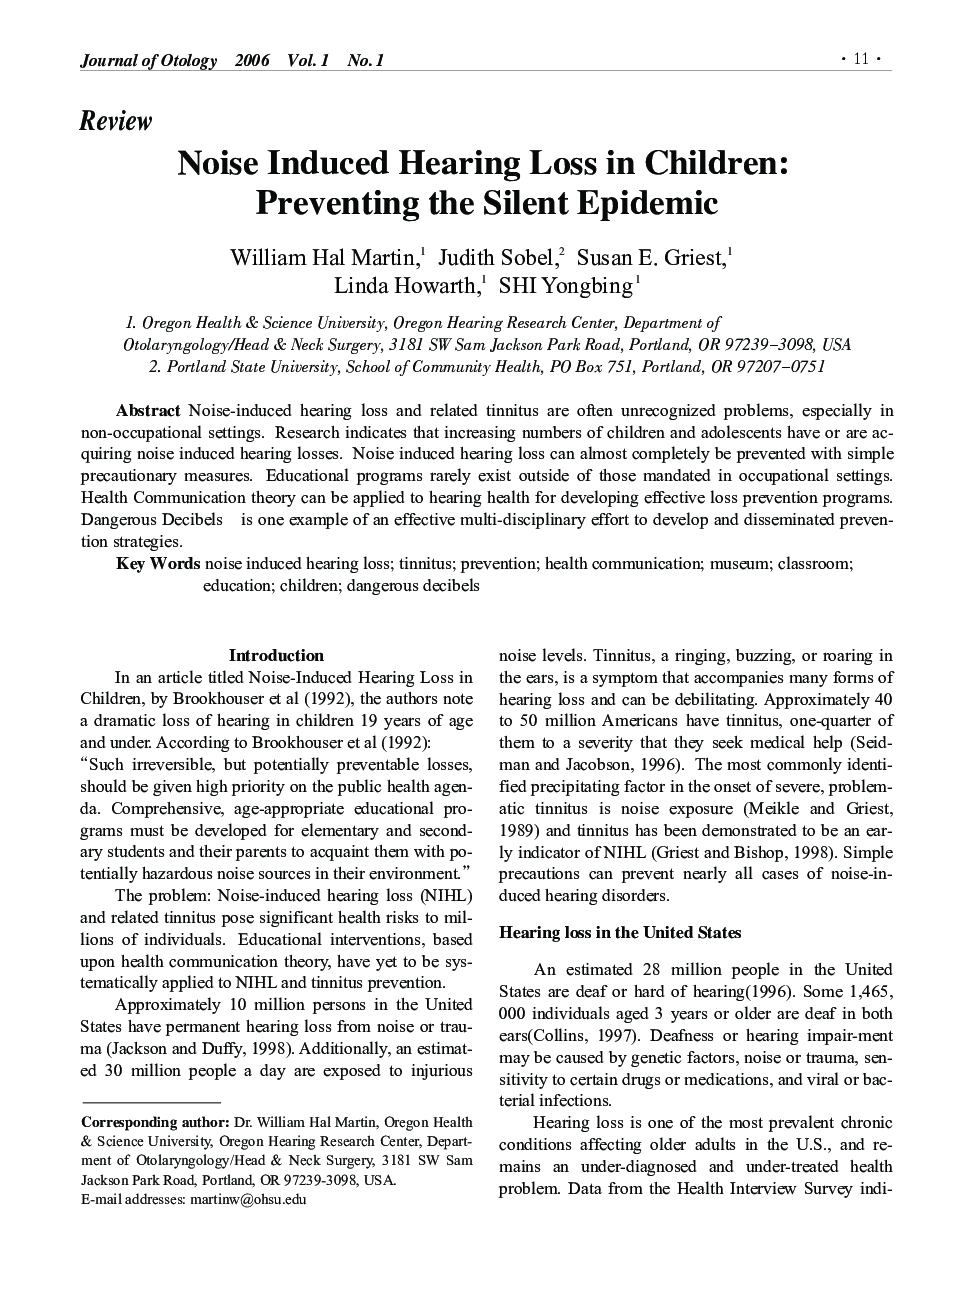 Noise Induced Hearing Loss in Children: Preventing the Silent Epidemic